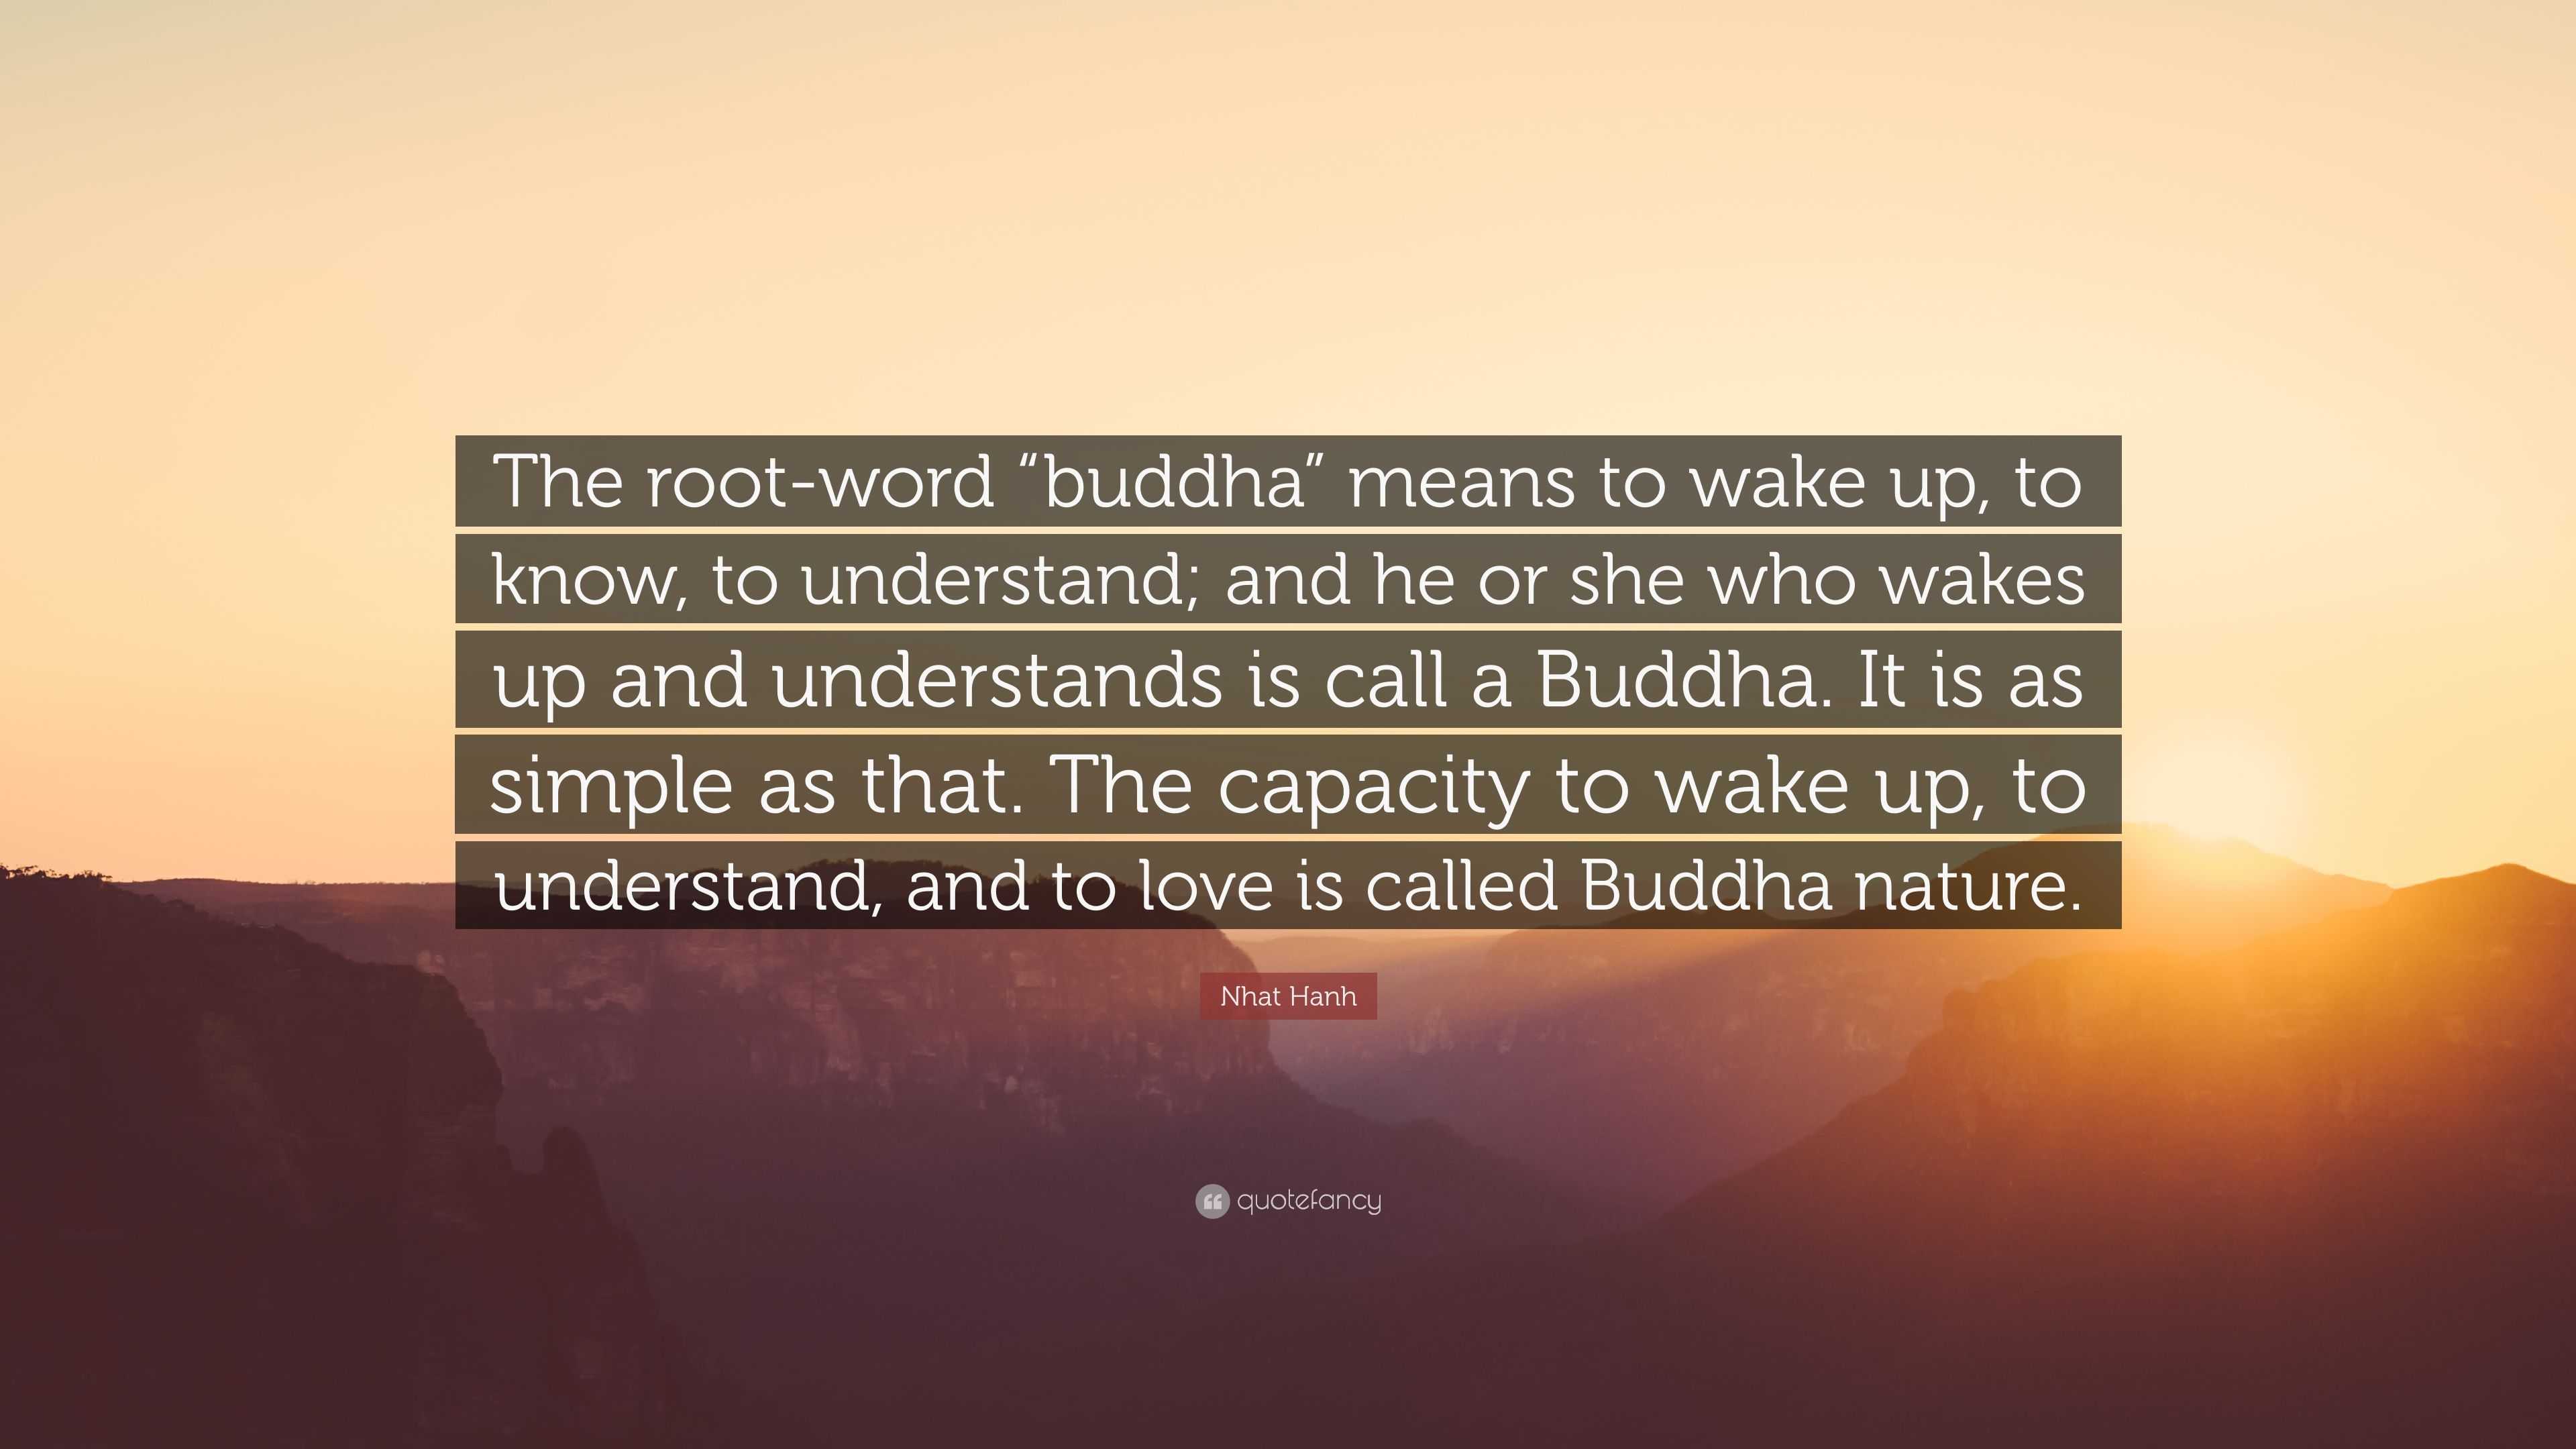 Nhat Hanh Quote: “The root-word “buddha” means to wake up, to know, to ...